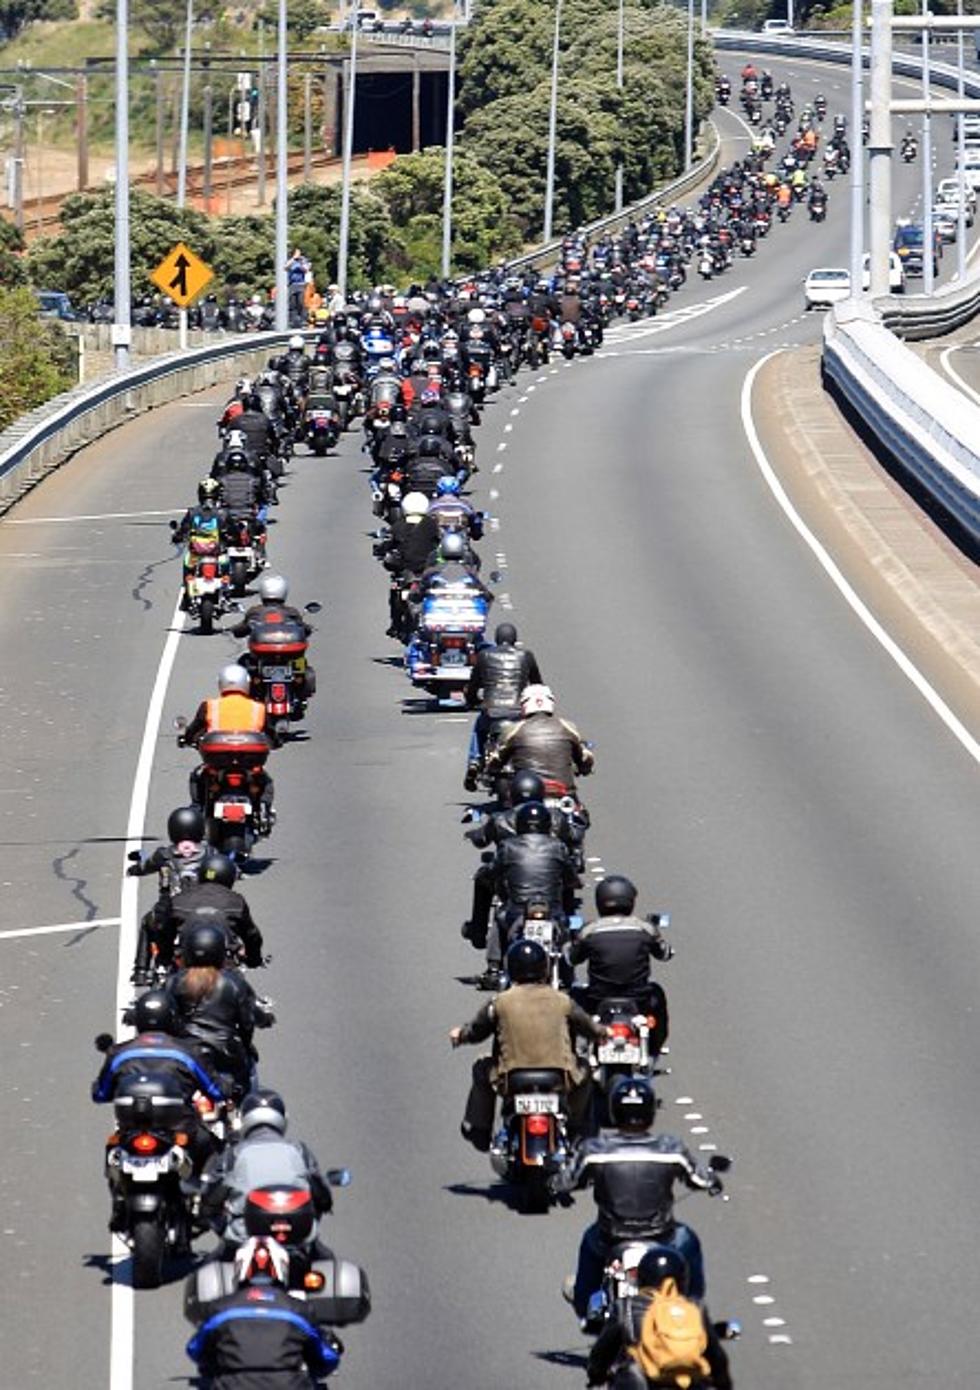 Get On Board For the 5th Annual Ride For Independence [VIDEO]